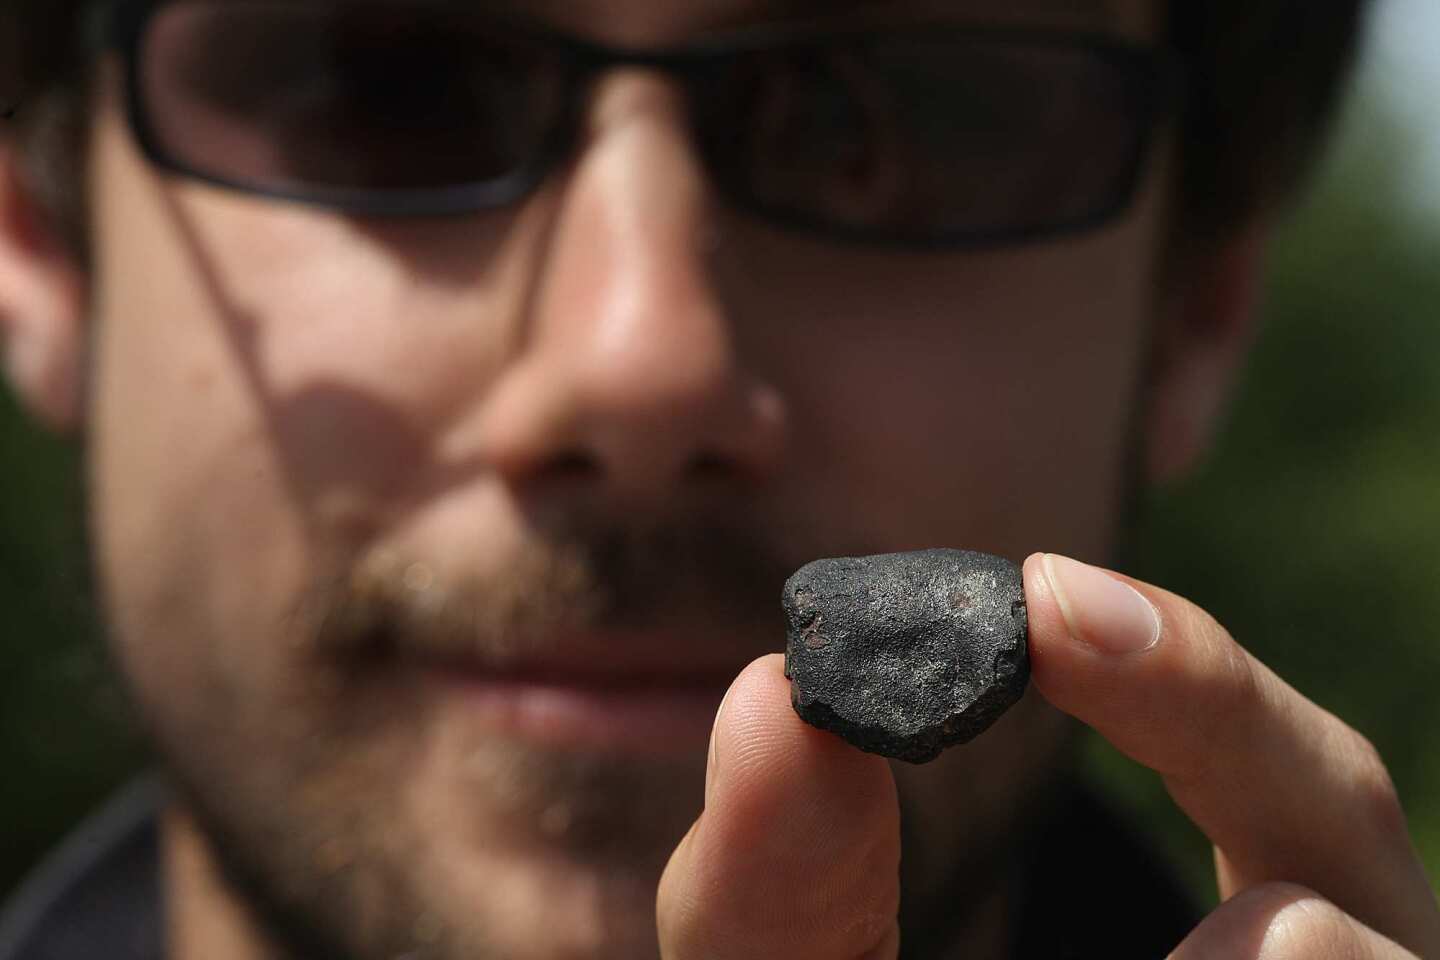 Jason Utas, a geology student at UC Berkeley, holds a 7.5-gram fragment of a meteorite called CM chondrite he found Friday in Coloma, Calif. He was among the many people who descended into the area following a fireball on April 22. Utas found the fragment in the David Moore Nature Area off Highway 49, just west of Coloma. Scientists used weather radar to track the movements of the object and predicted it fell near Coloma. The meteorite is a rare class that contains water and carbon compounds that are similar to those responsible for producing life on Earth. It is in this location that gold was first discovered in 1848.